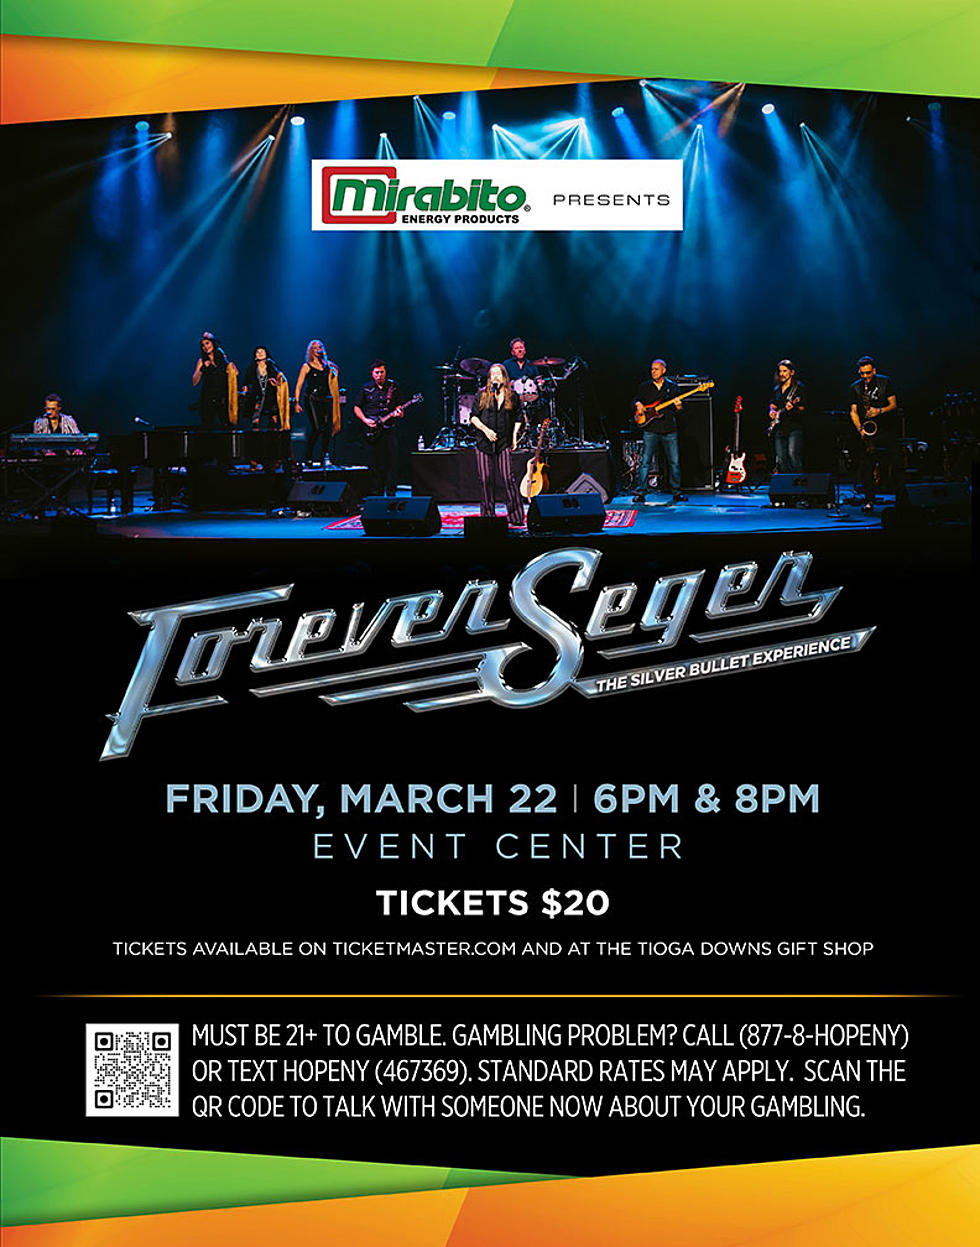 Win Tickets To See Forever Seger - The Silver Bullet Experience